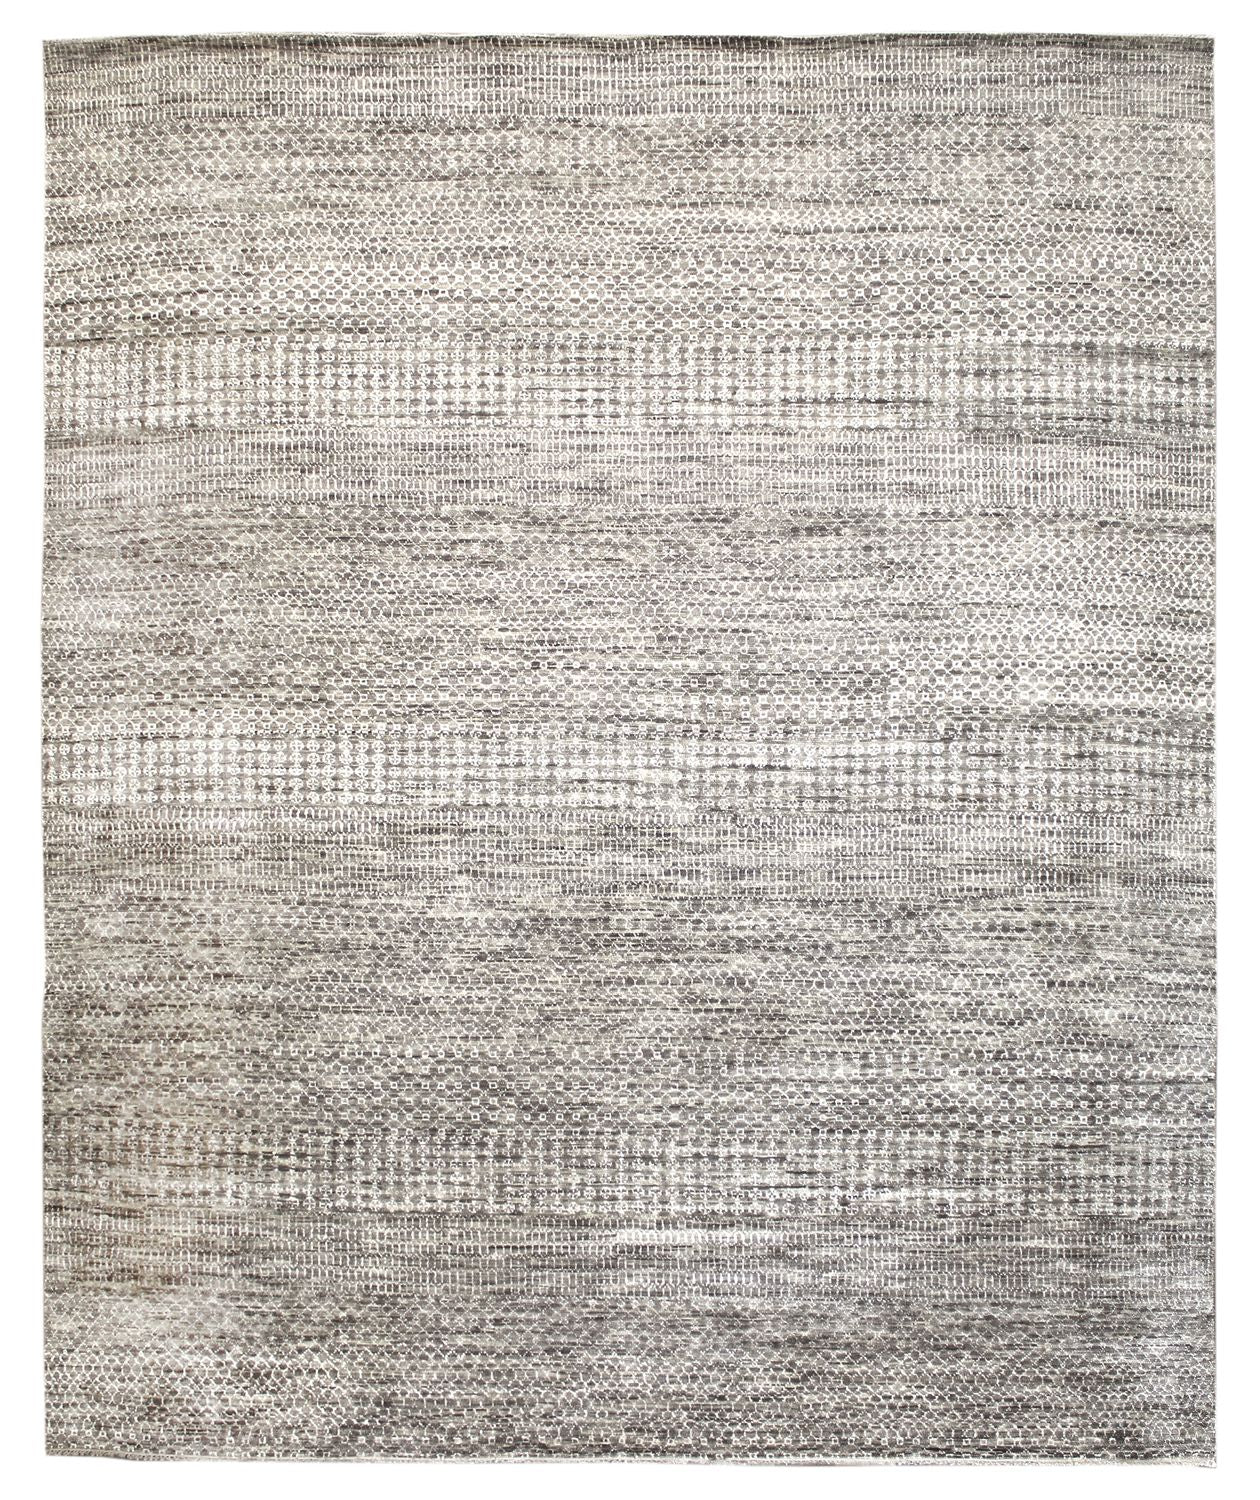 Illusions 2 Handwoven Contemporary Rug